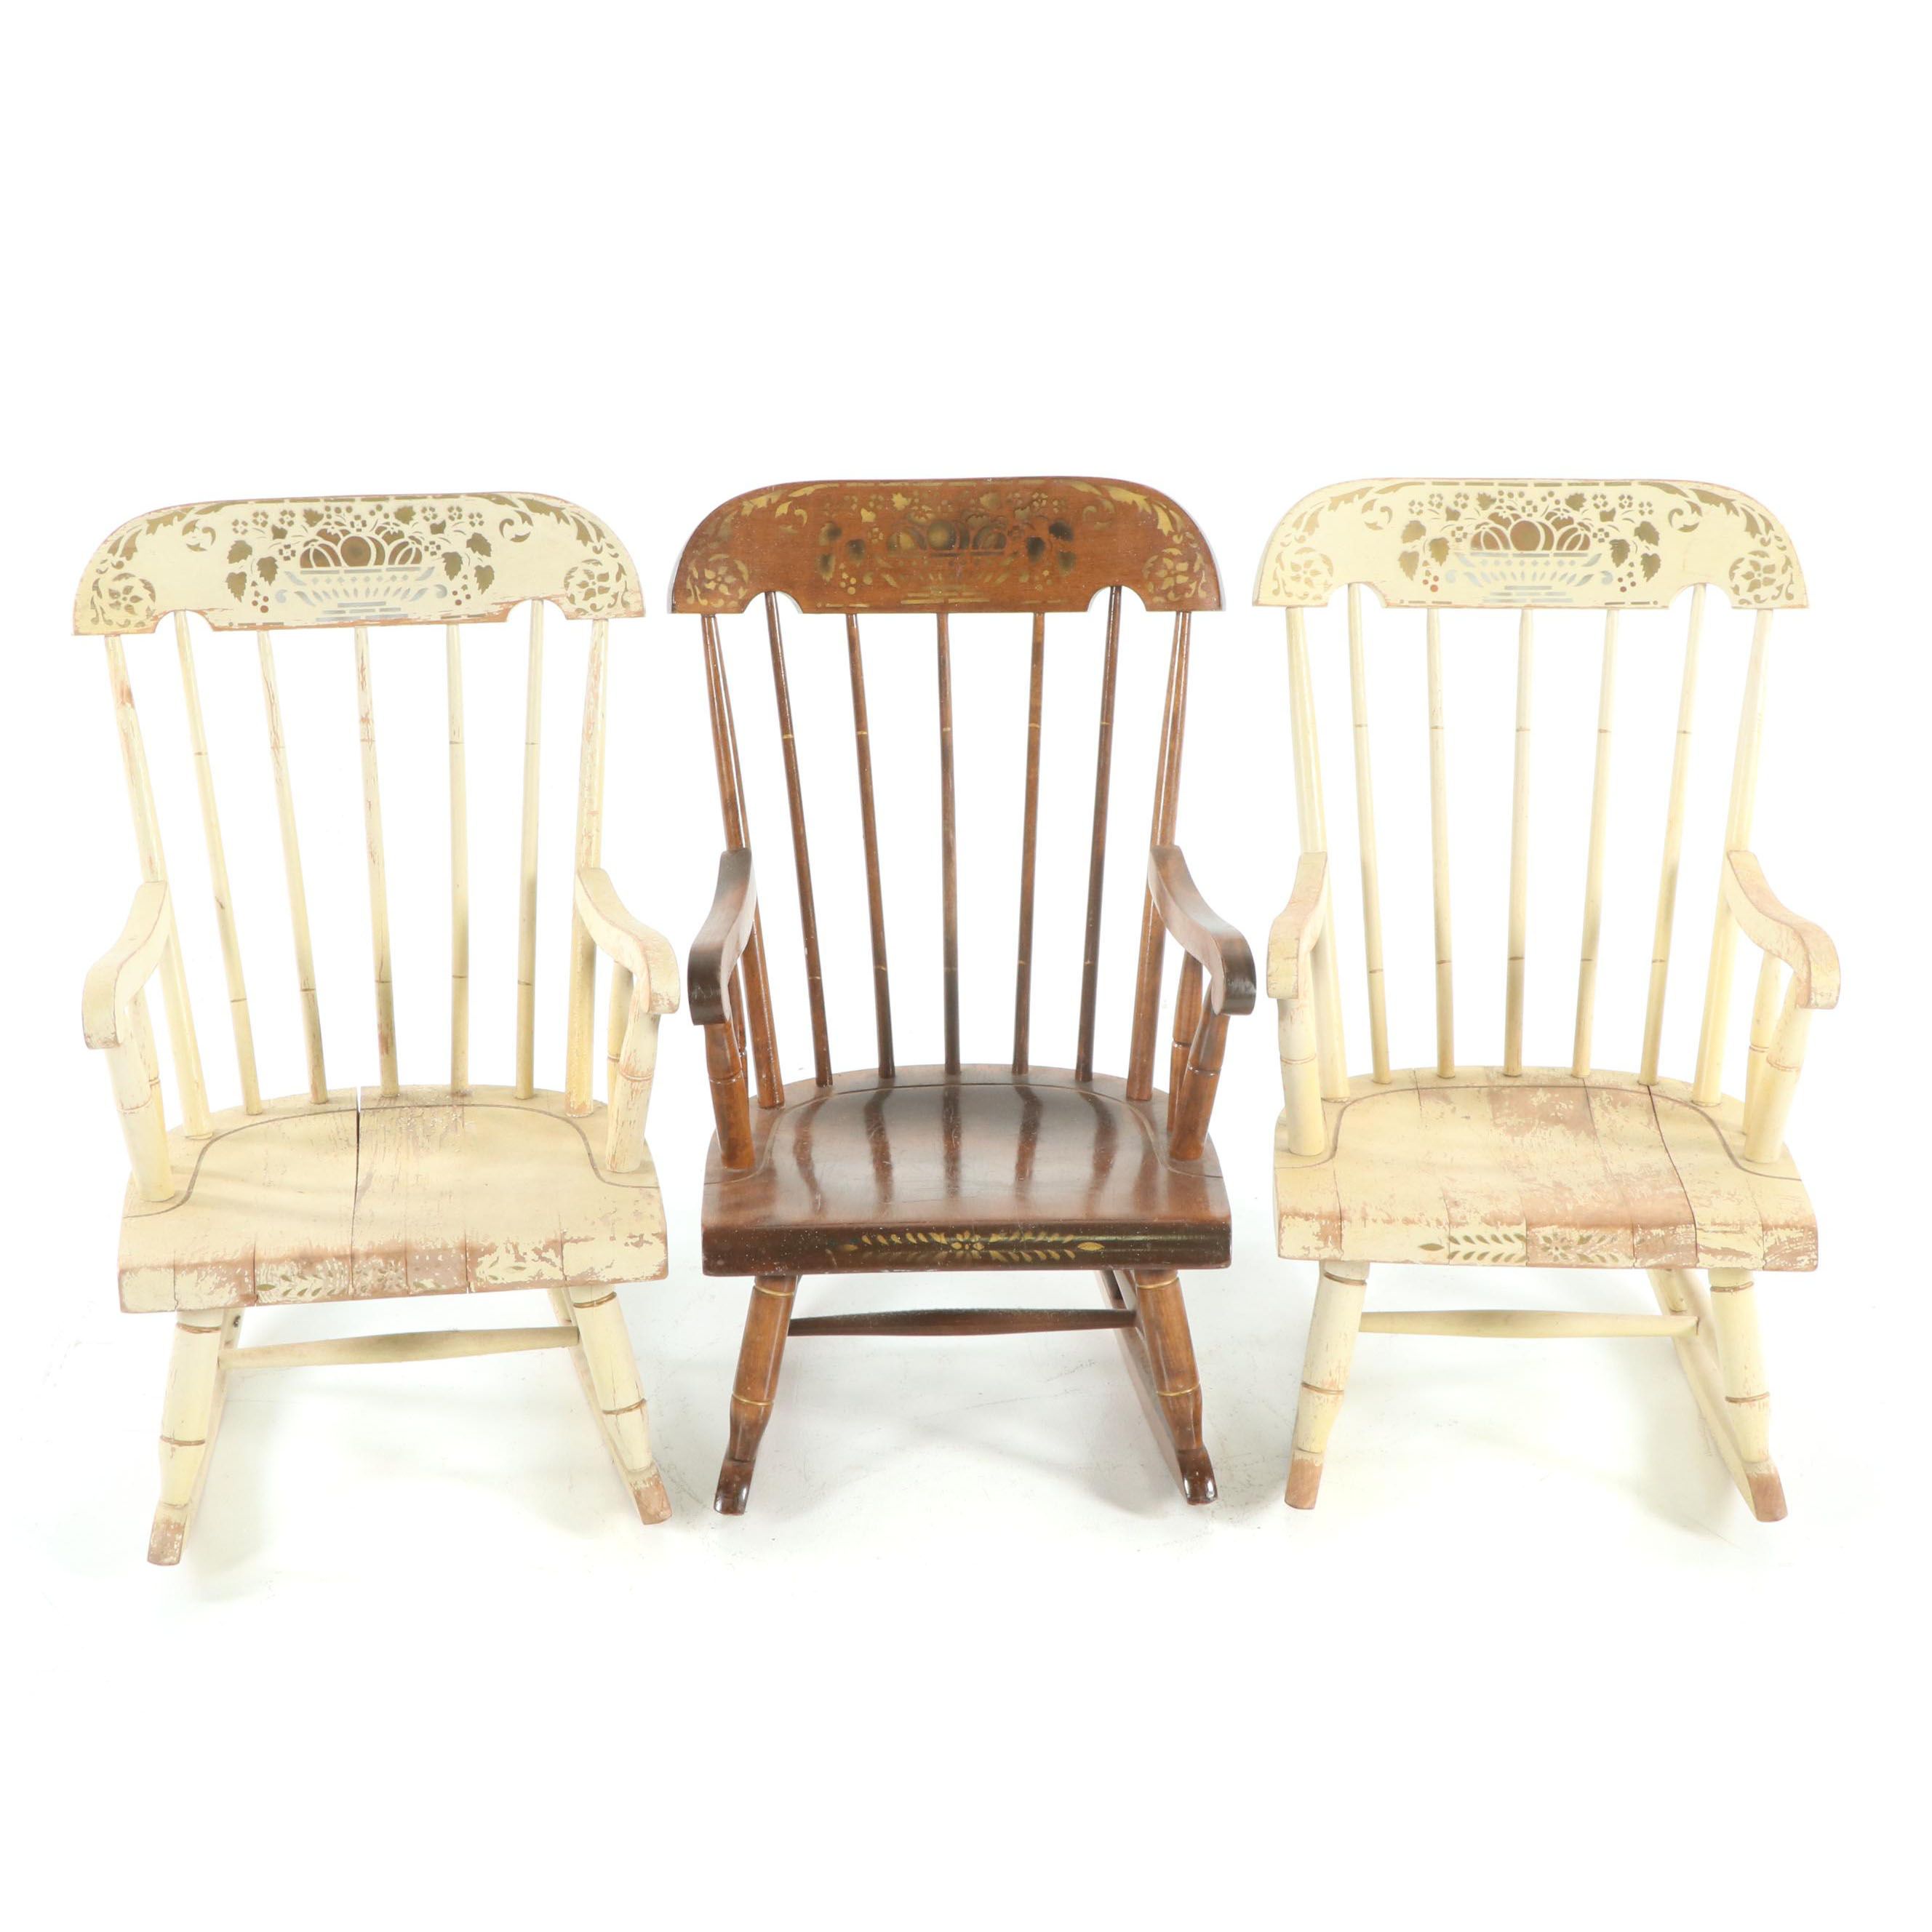 nichols and stone childs rocking chair